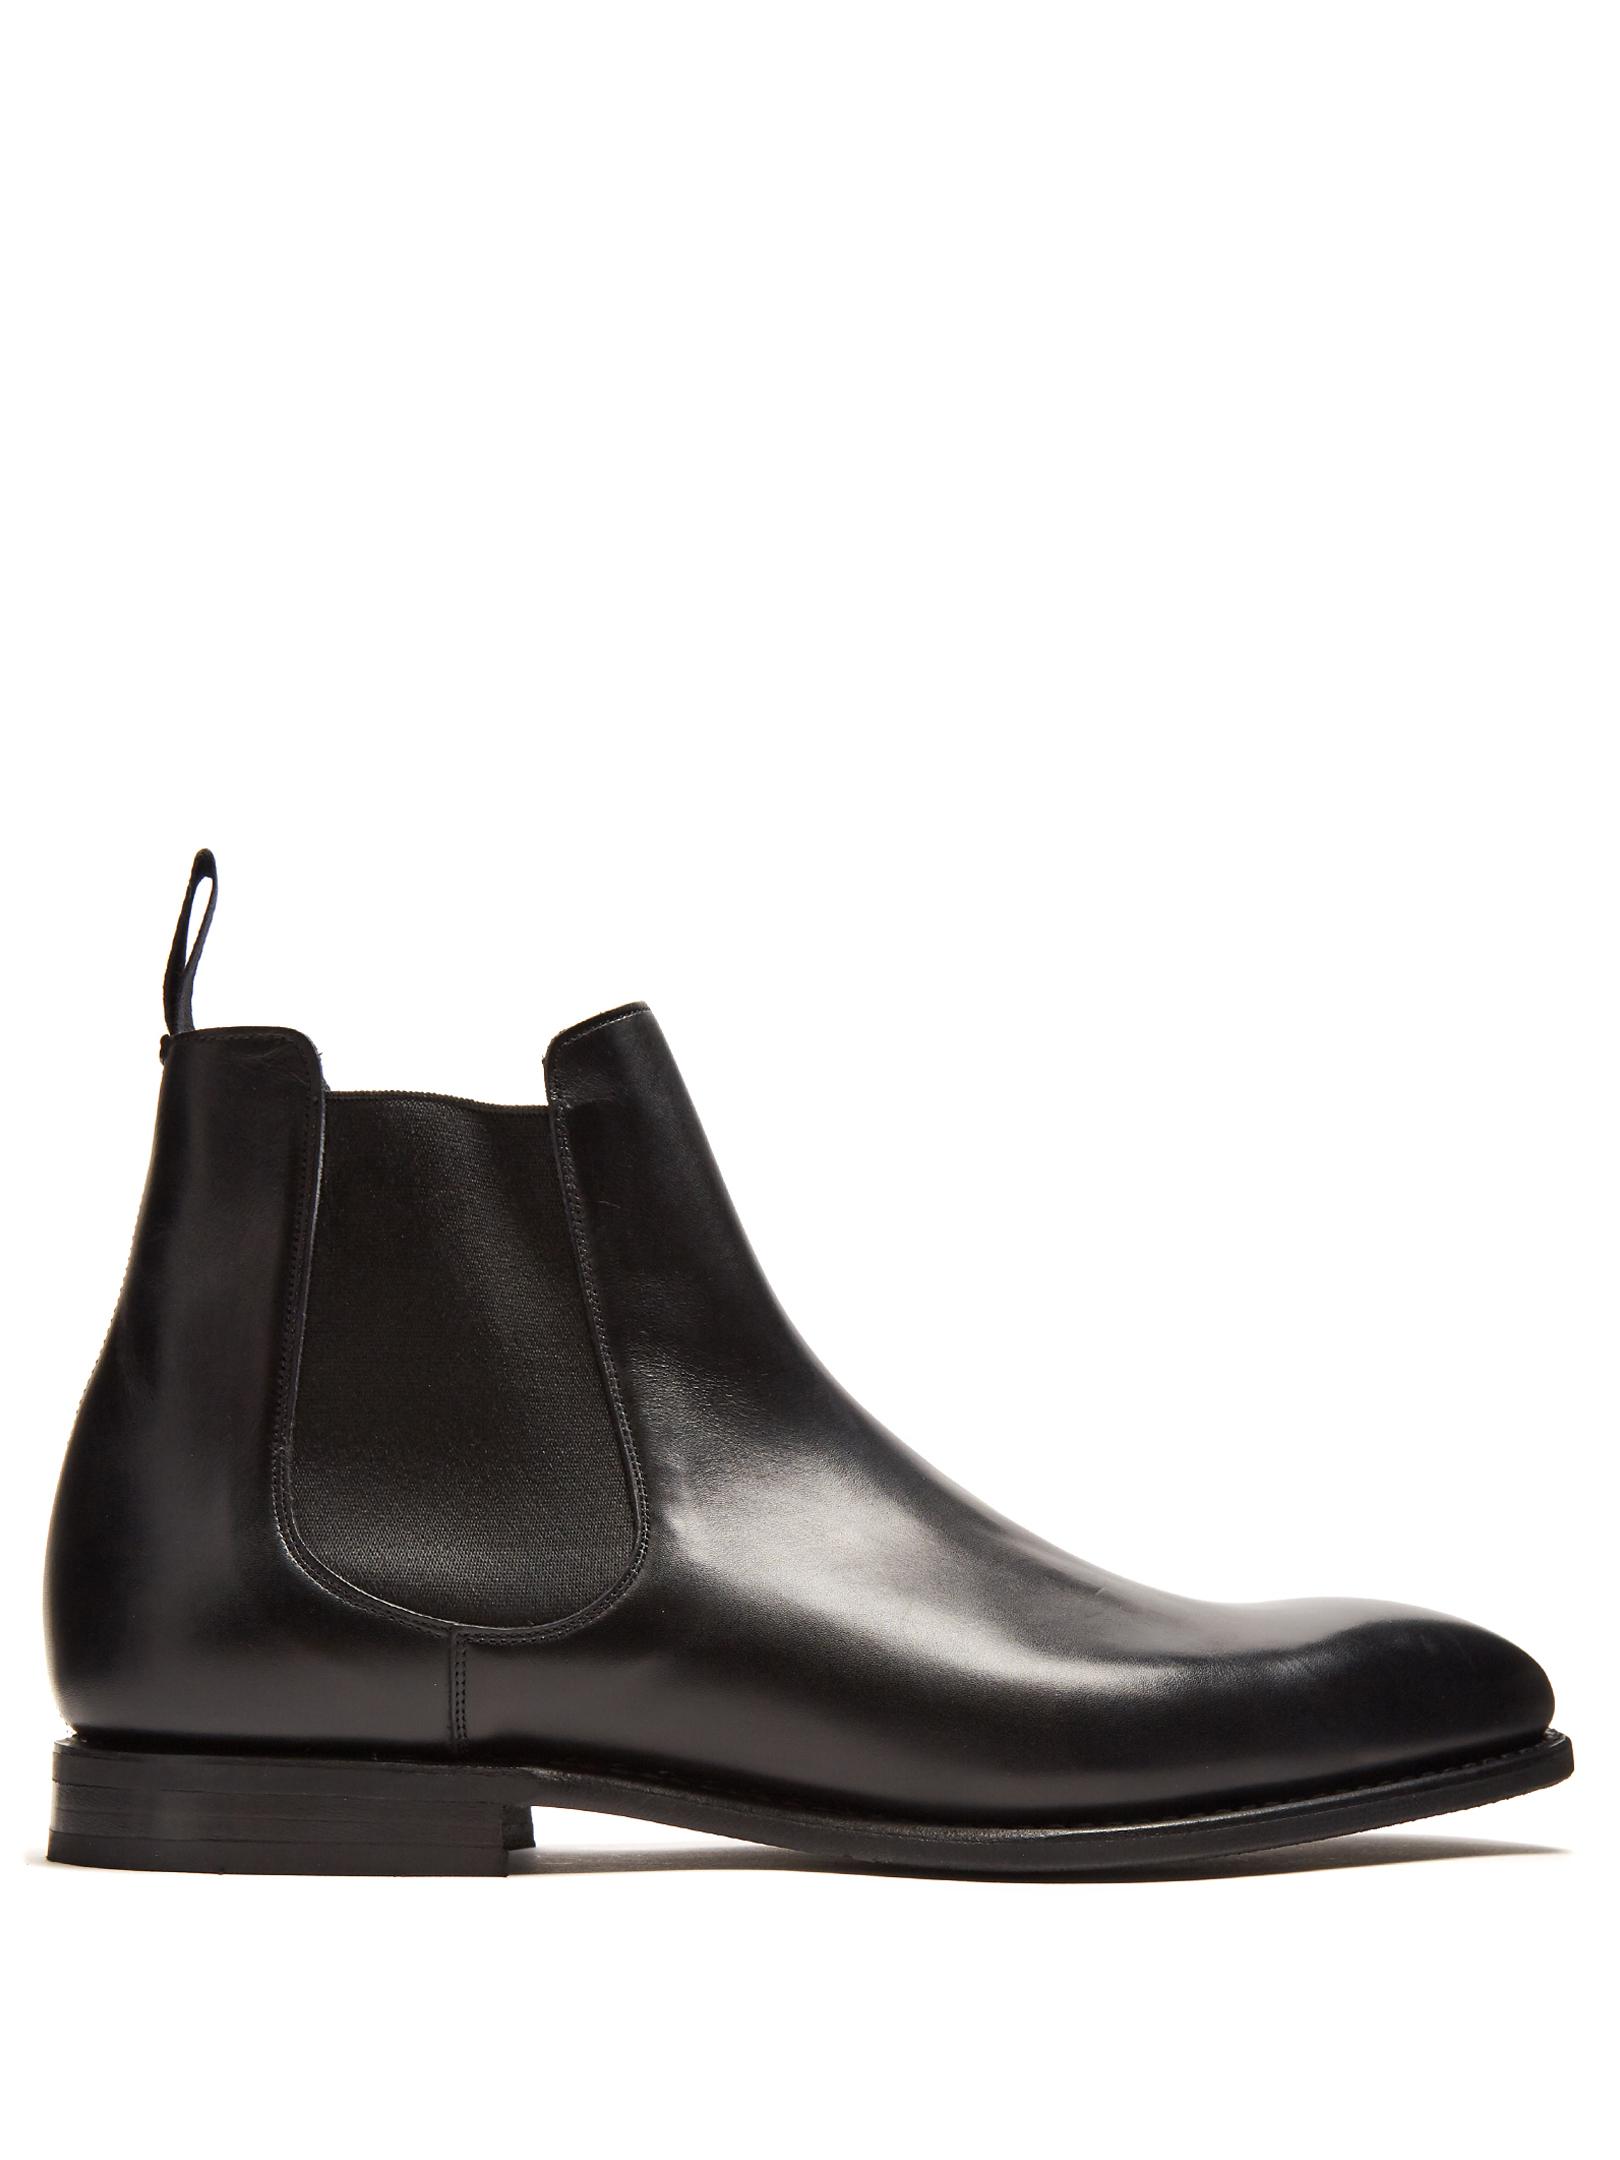 Church's Prenton Leather Chelsea Boots in Black for Men | Lyst